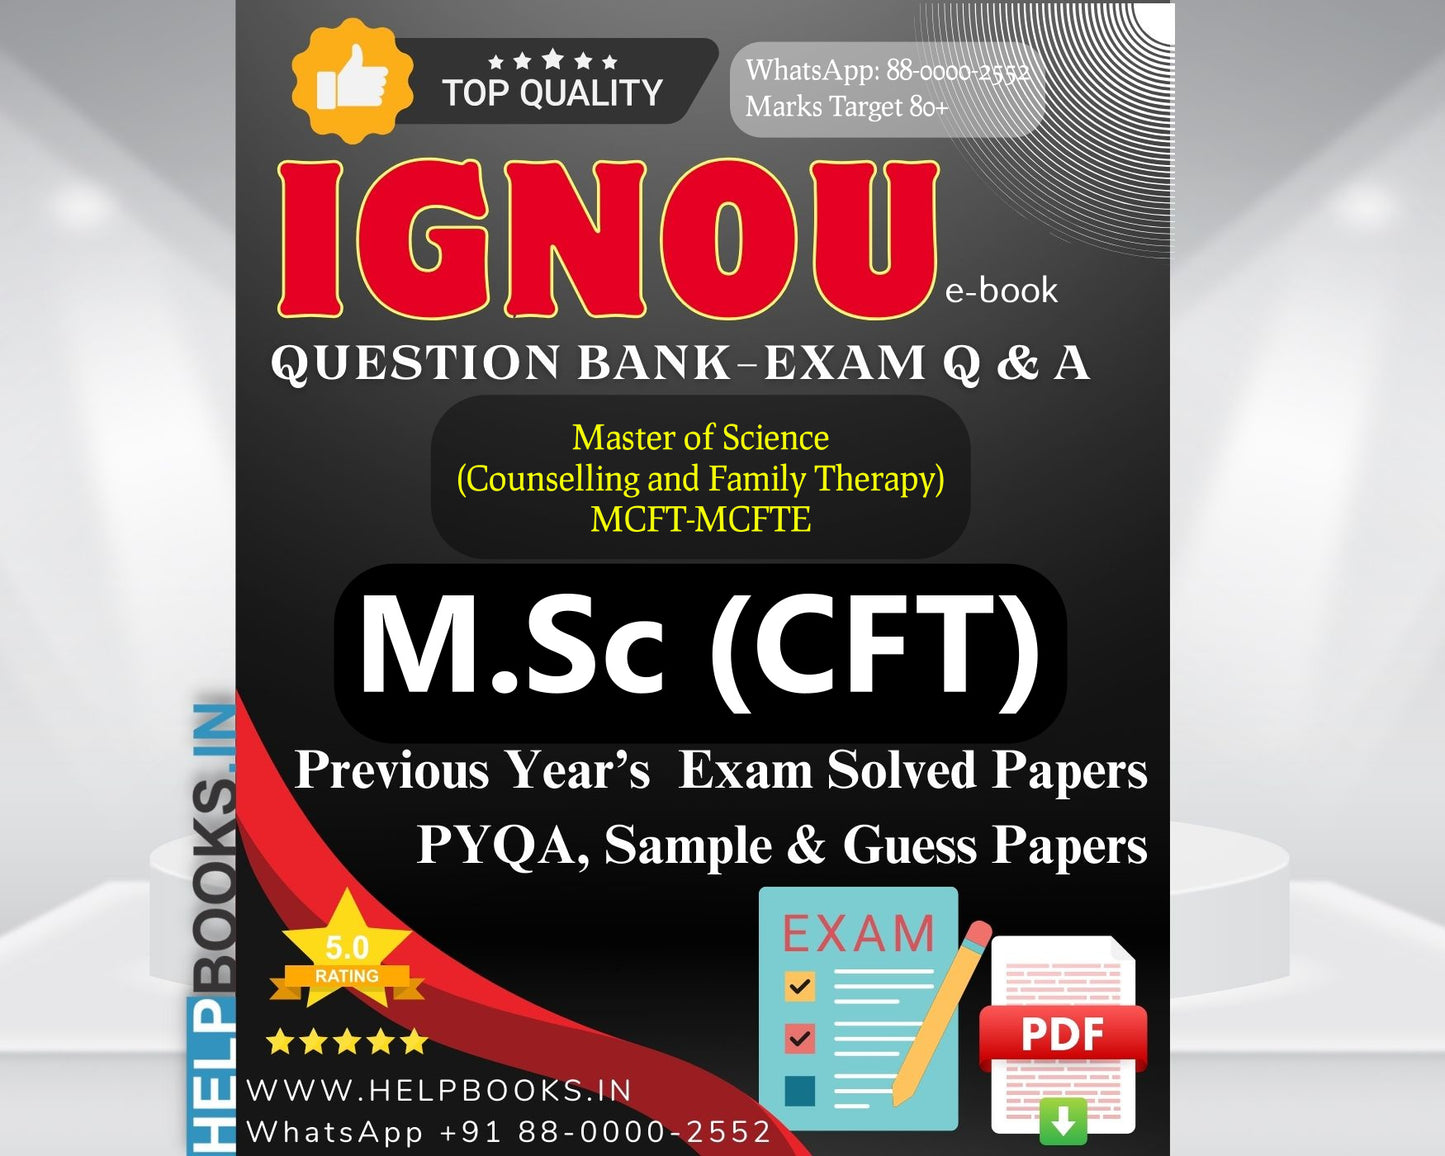 MSCCFT IGNOU Exam Combo of 10 Solved Papers: 5 Previous Years' Solved Papers & 5 Sample Guess Papers for Master of Science Counselling and Family Therapy